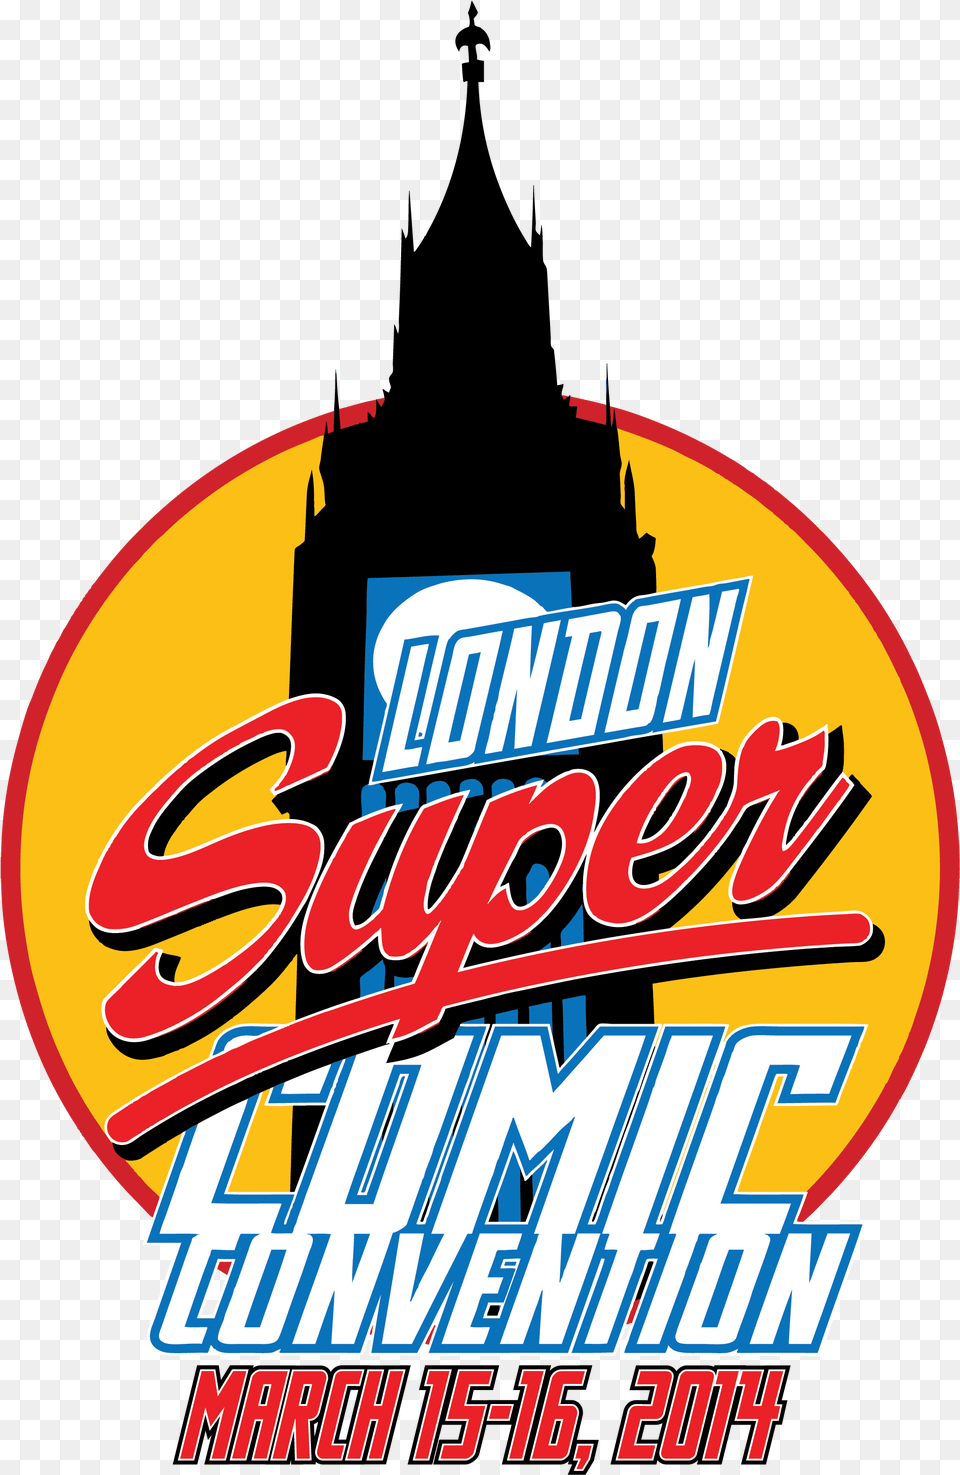 Lscc 2014 Logo With Date Rgb 300dpi London Super Comic Convention, Advertisement, Poster Png